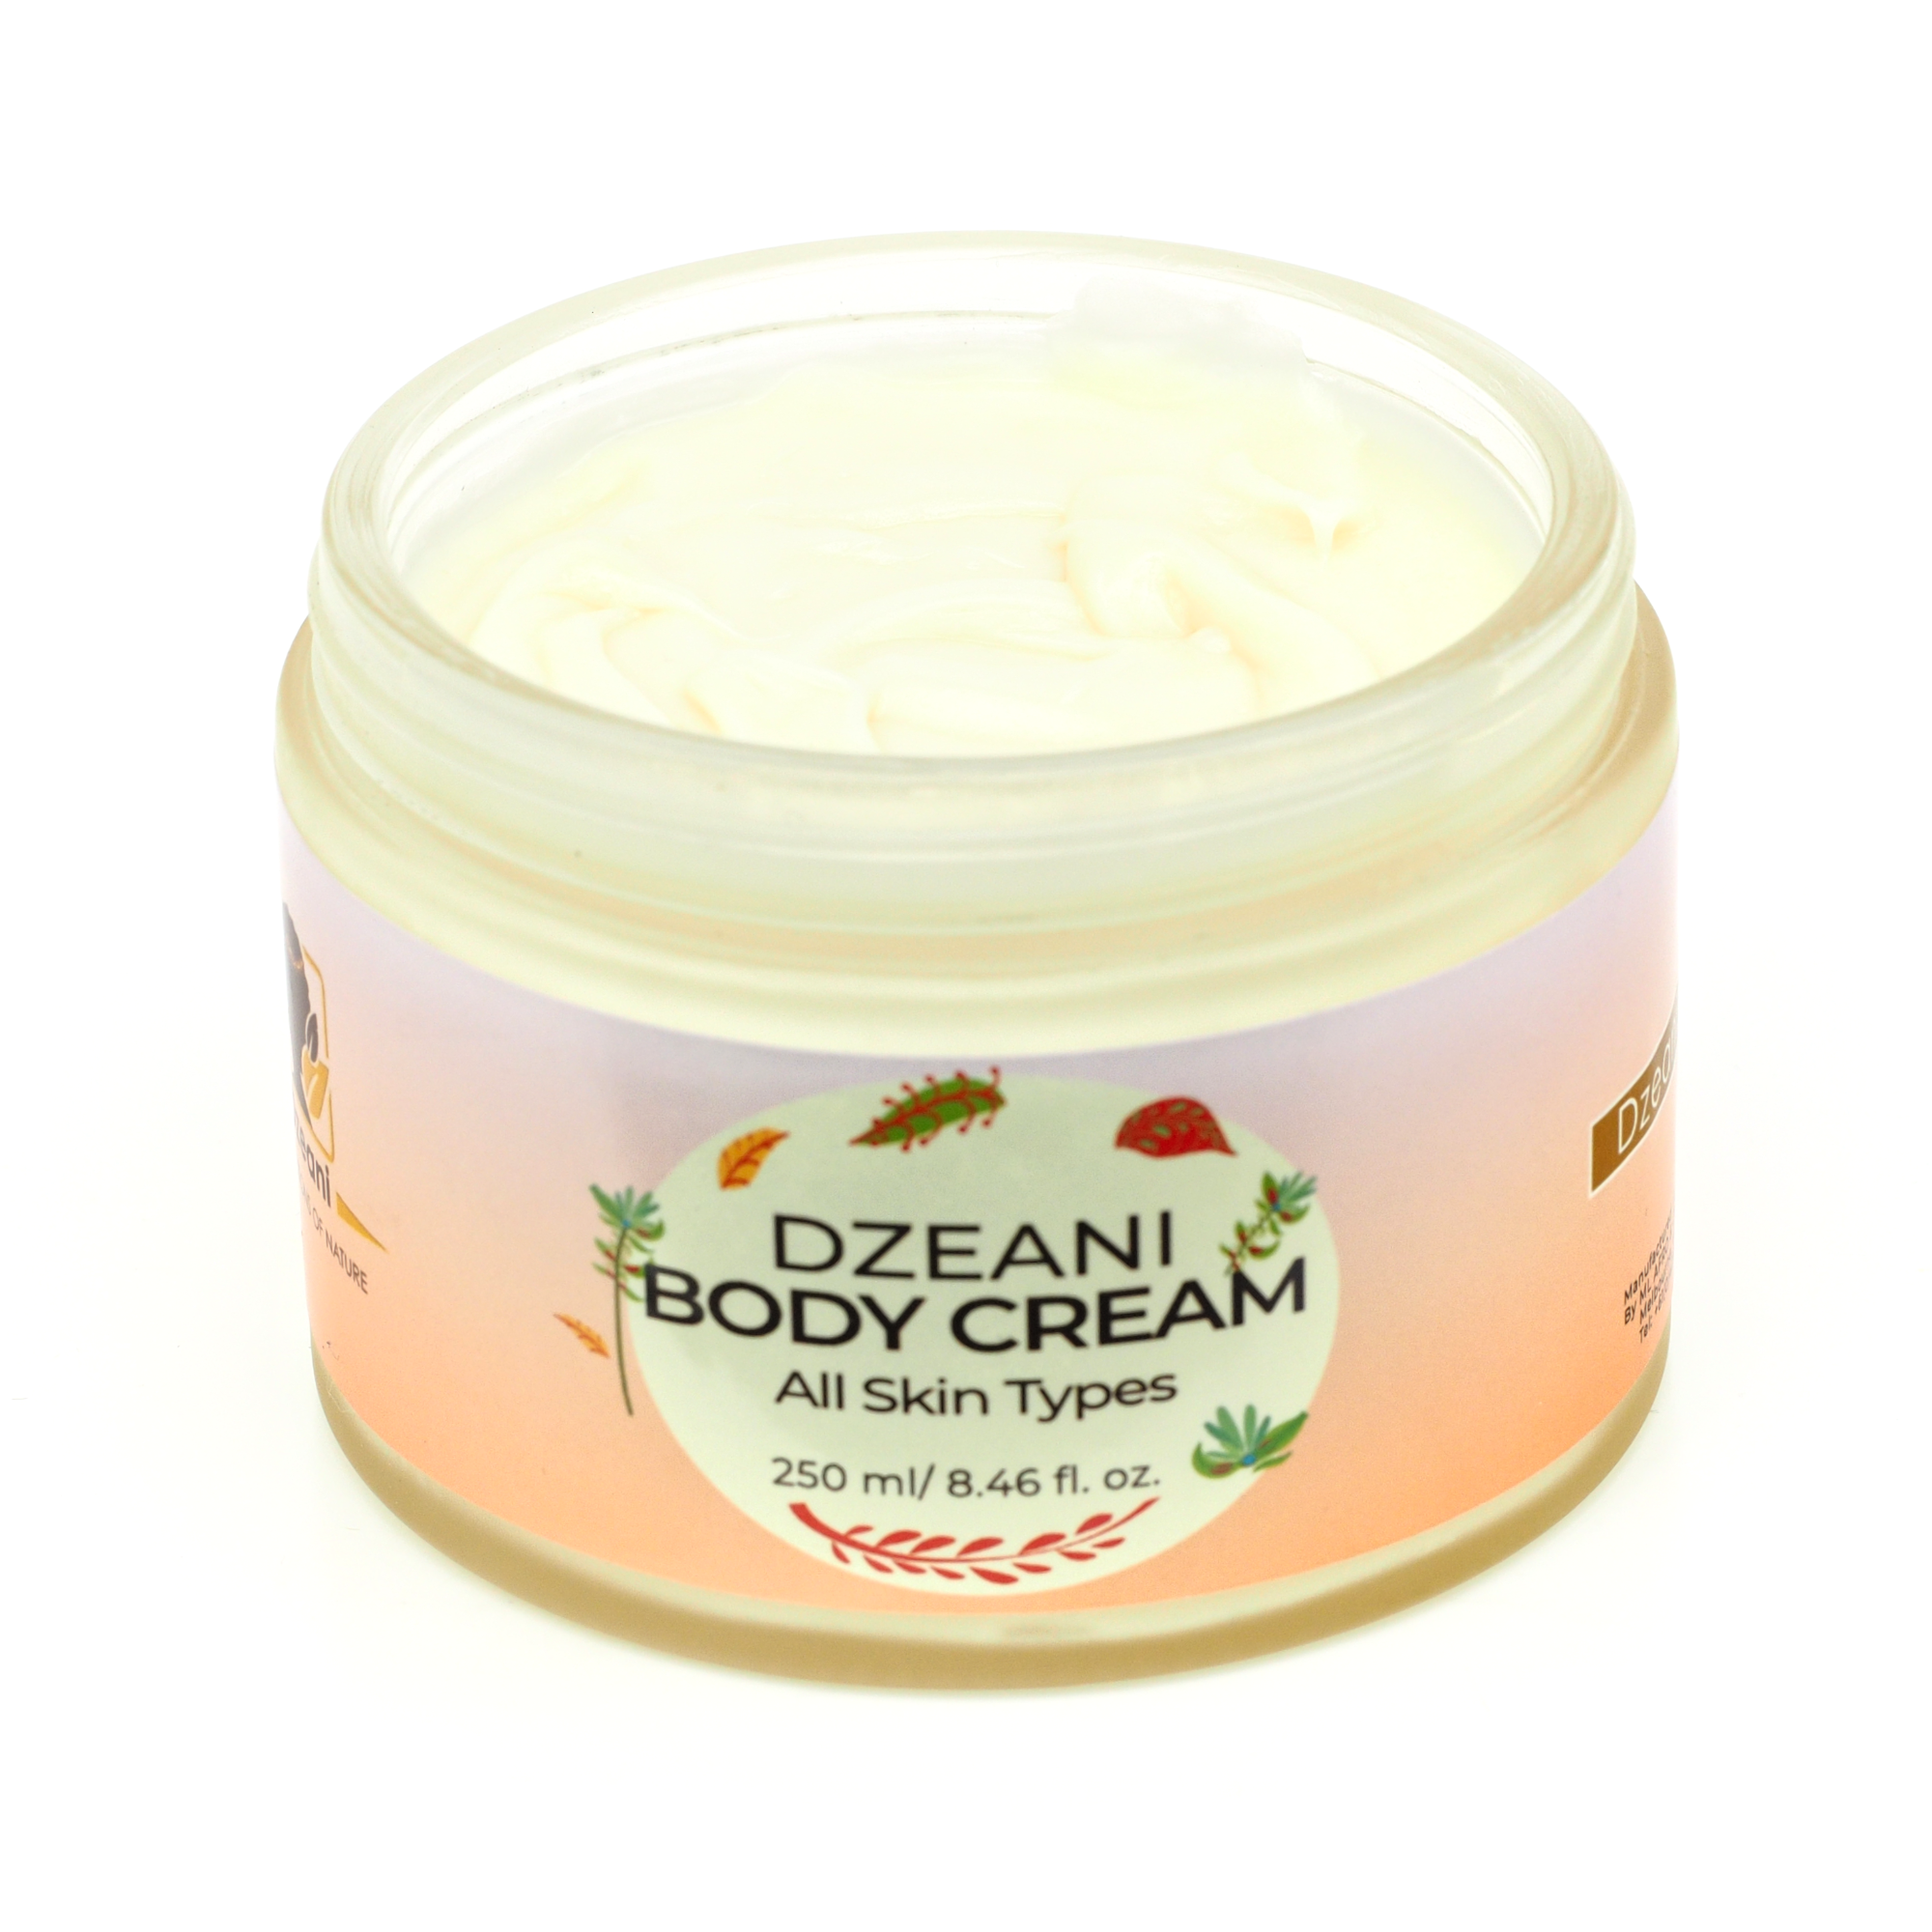 Dzeani Body Cream is for anyone looking for a body cream that provides deep hydration and nourishment to the skin